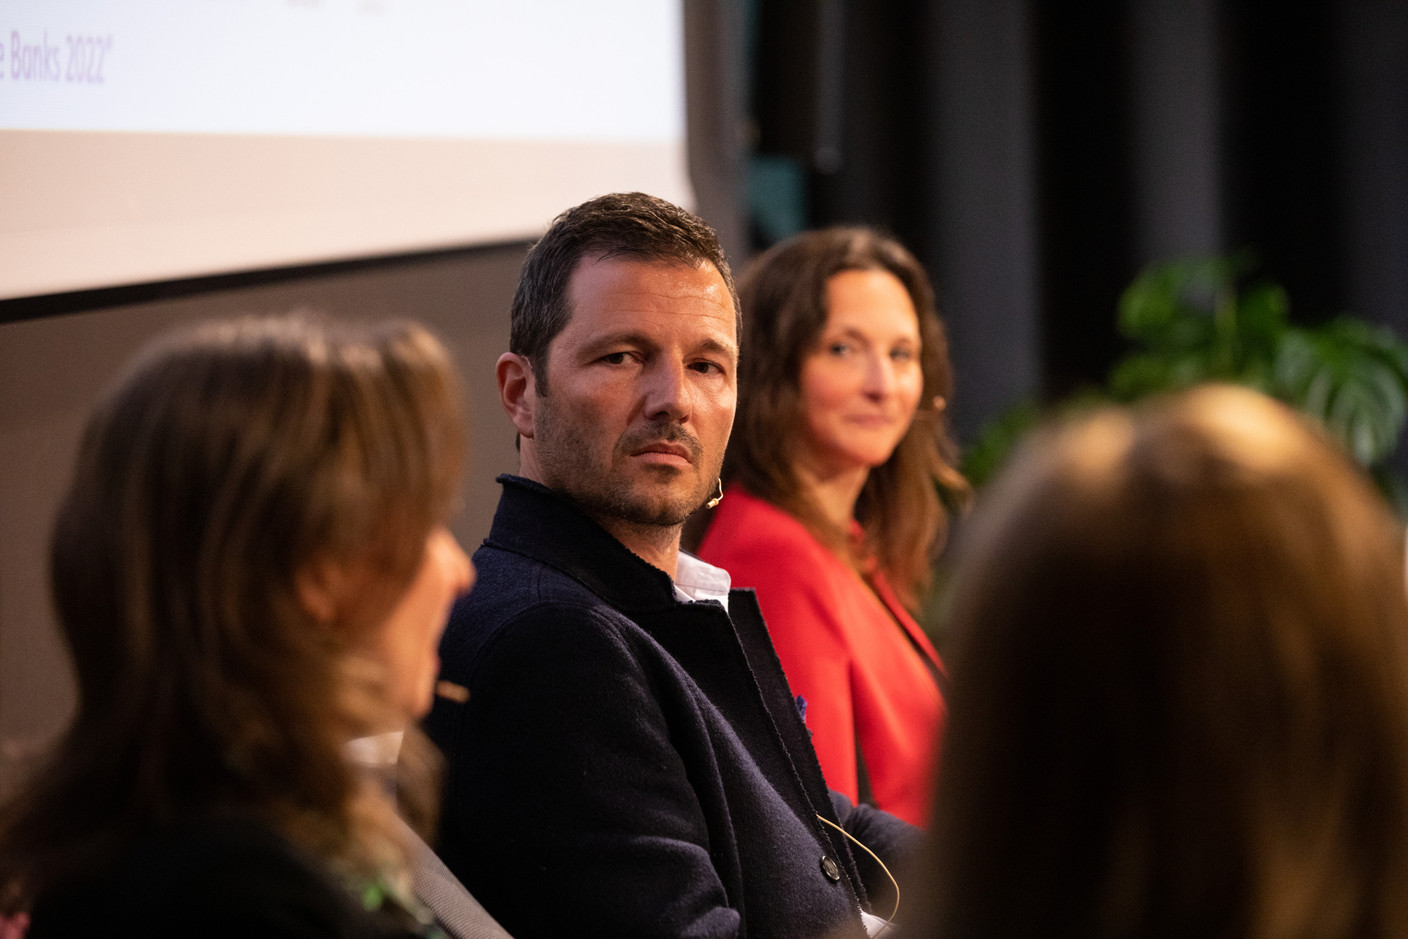 Pascal Rapallino (Verona Multi Family Office) was one of the panellists at the roundtable on private banking, held on 30 March 2023. Photo: Eva Krins/Maison Moderne